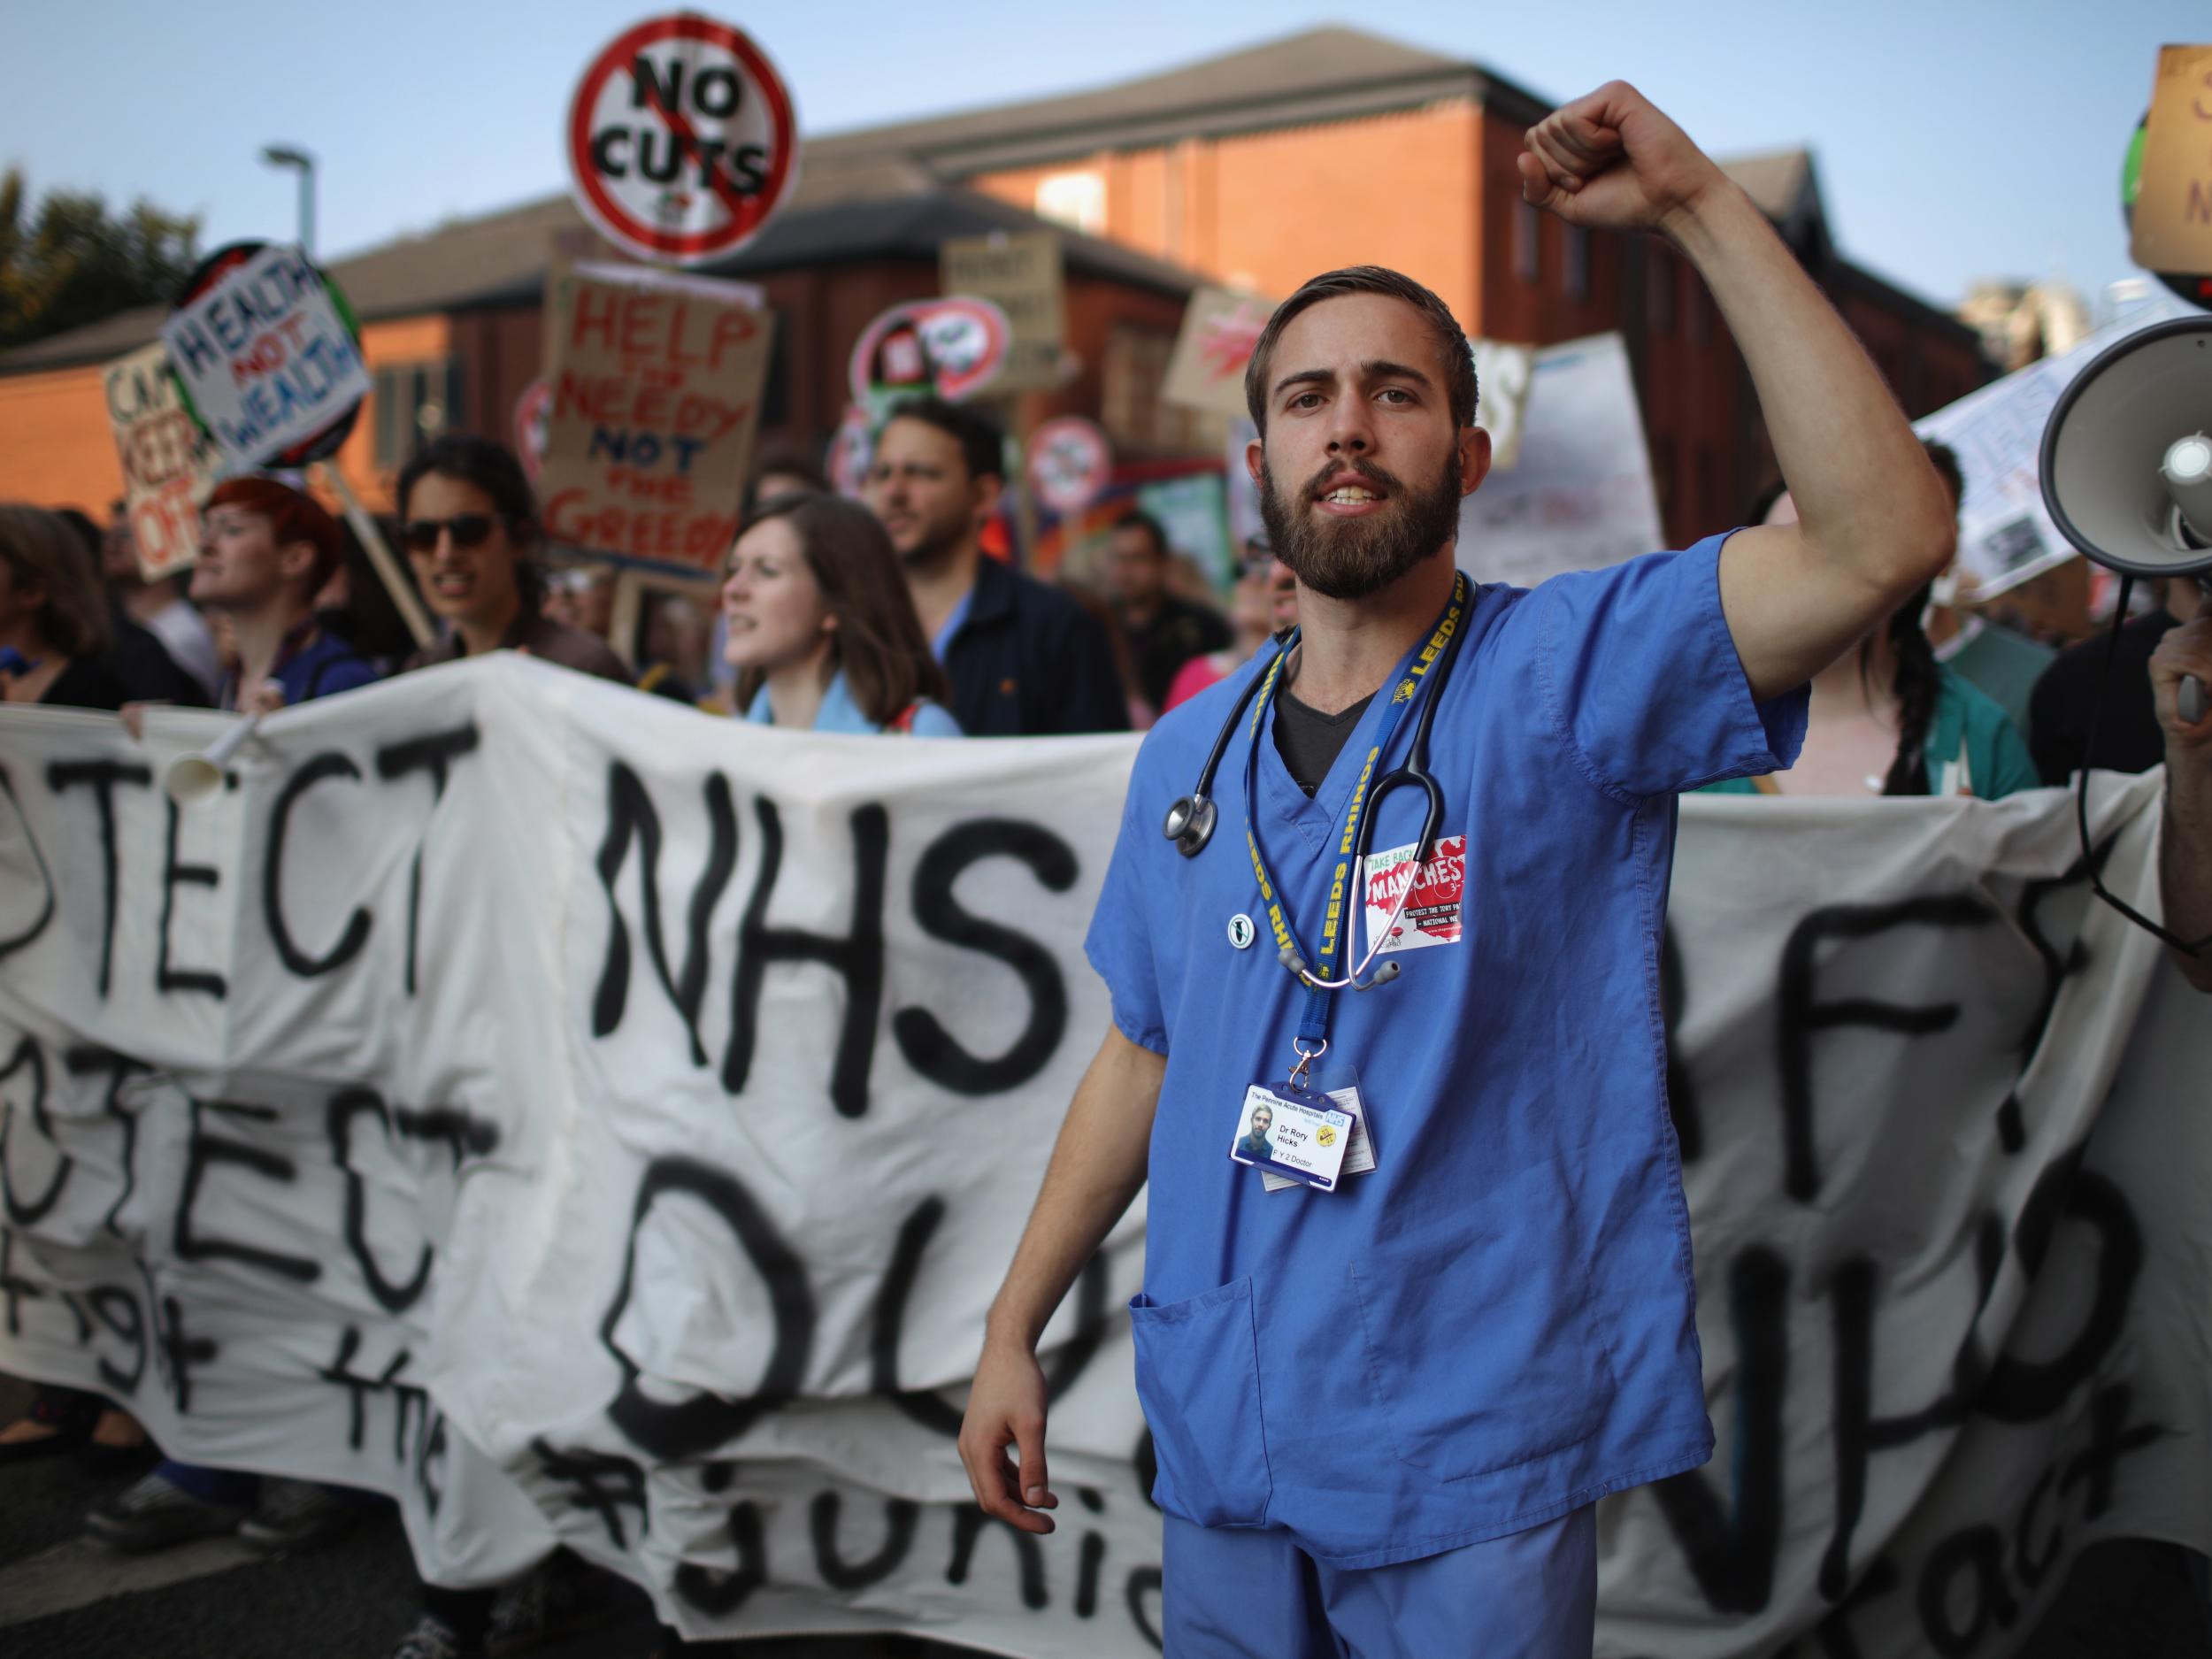 NHS workers take part in an anti-austerity protest